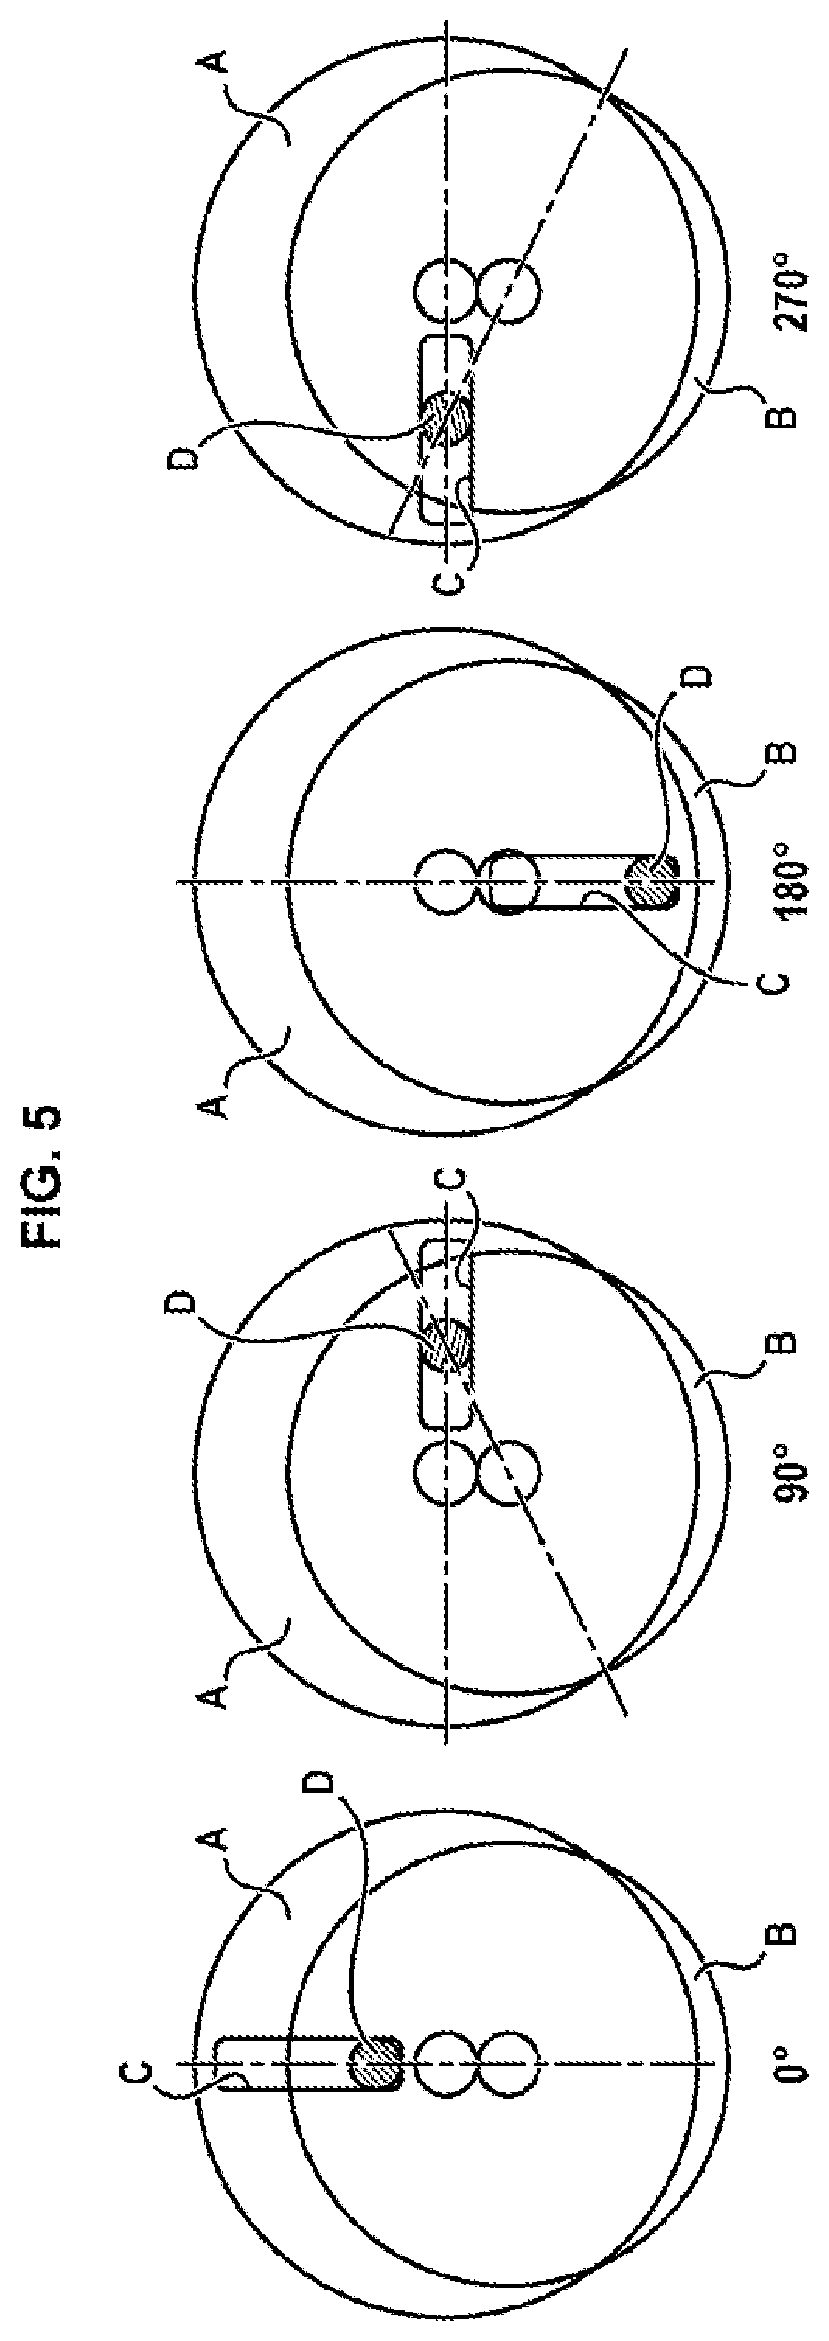 Fluidic rotor having orientable blades with improved blade control